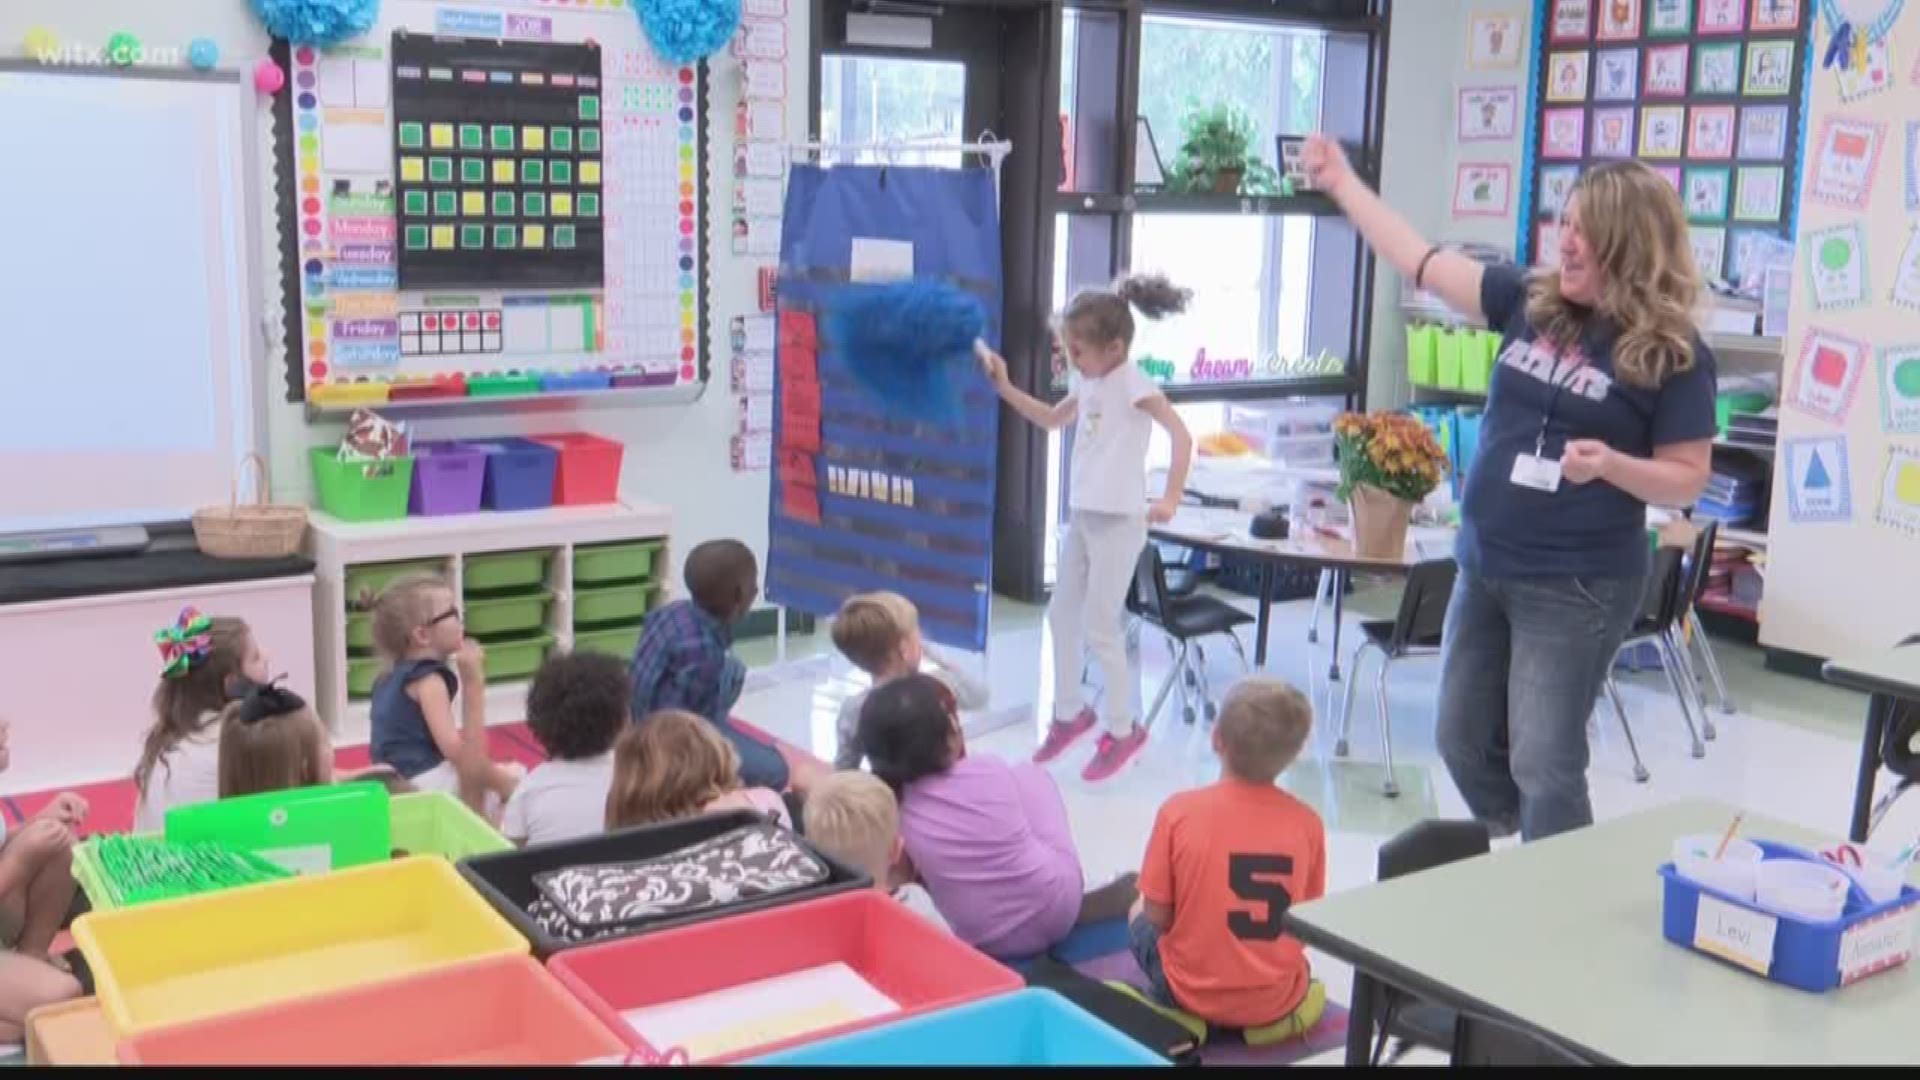 When you step inside her classroom, you can tell just how passionate she is about teaching.